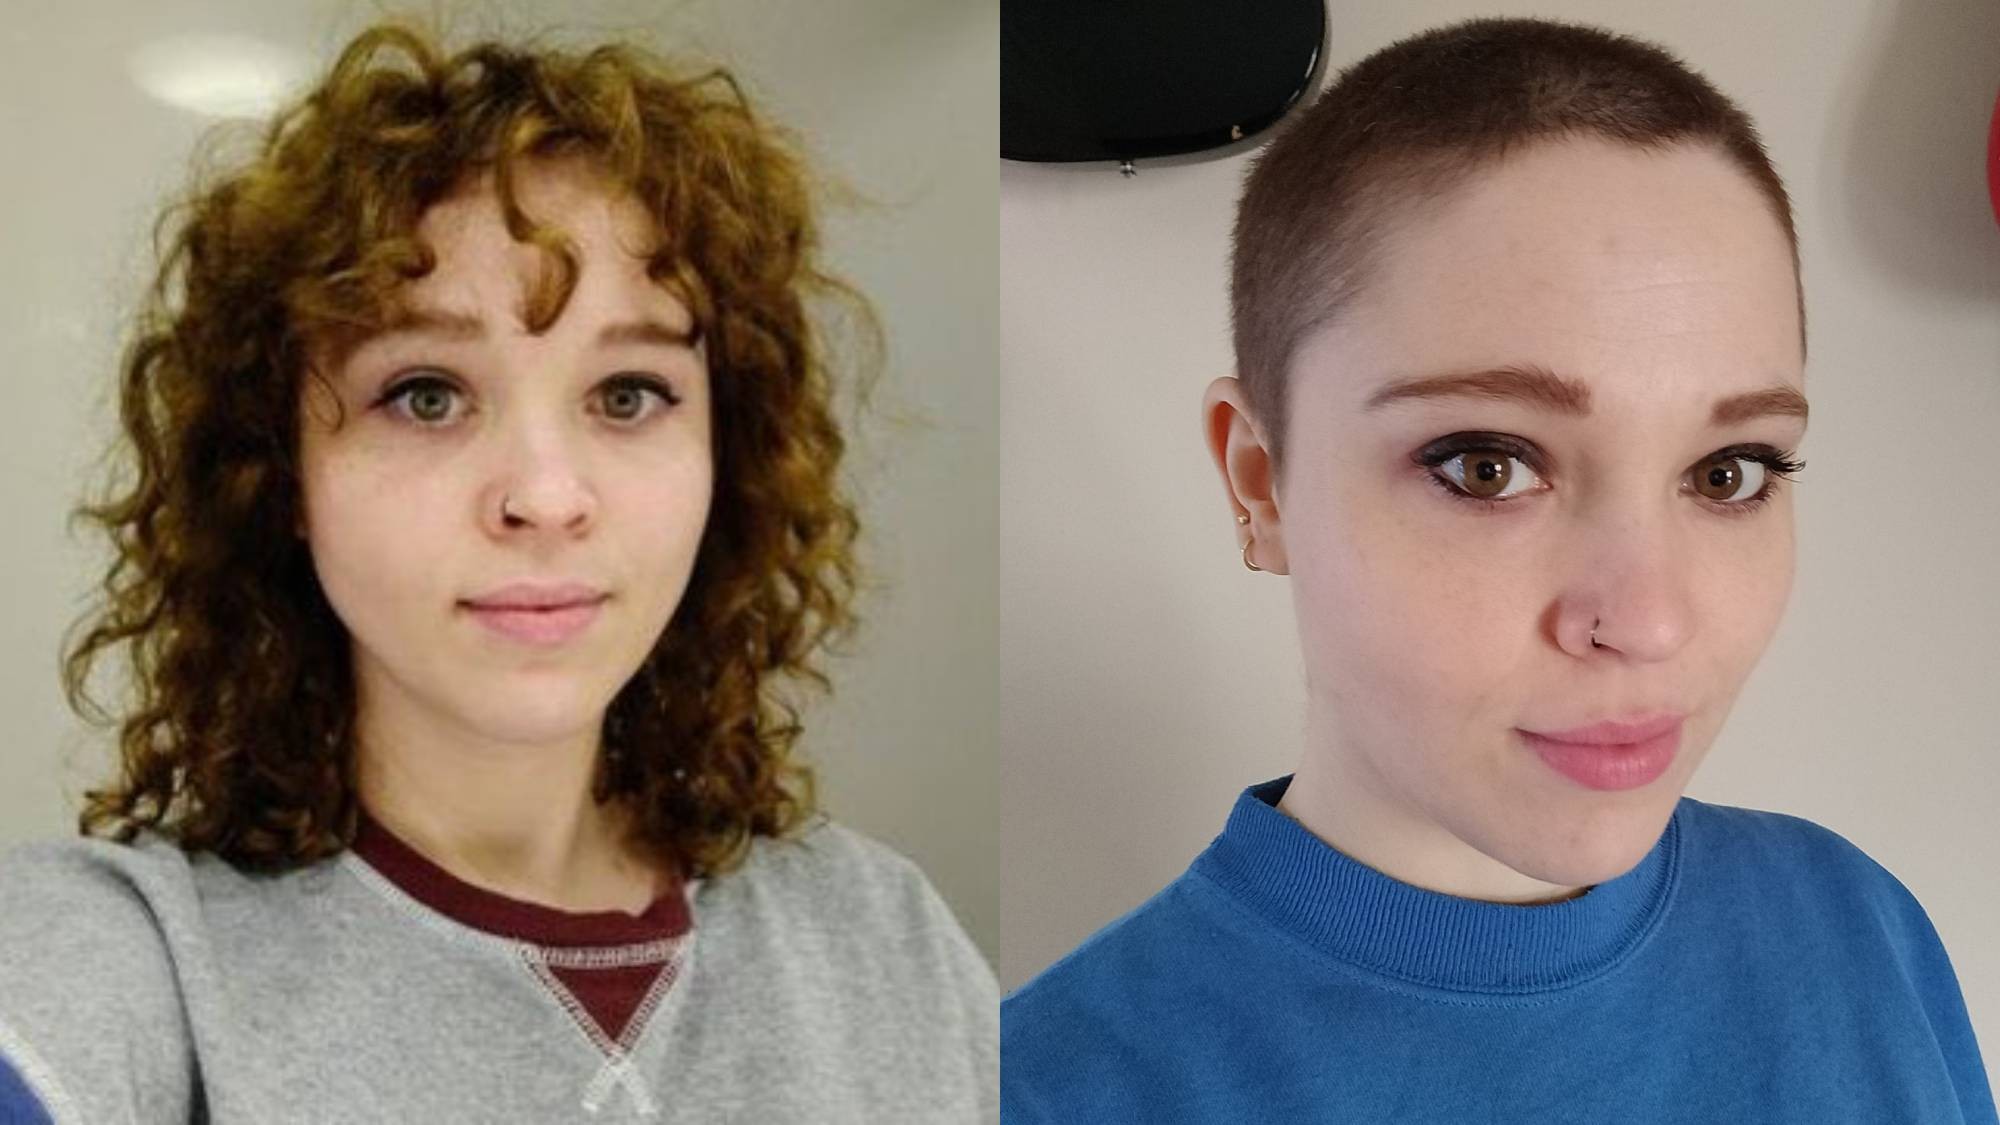 Before and After Photos of Women Who Shaved Their Heads in Self-Isolation